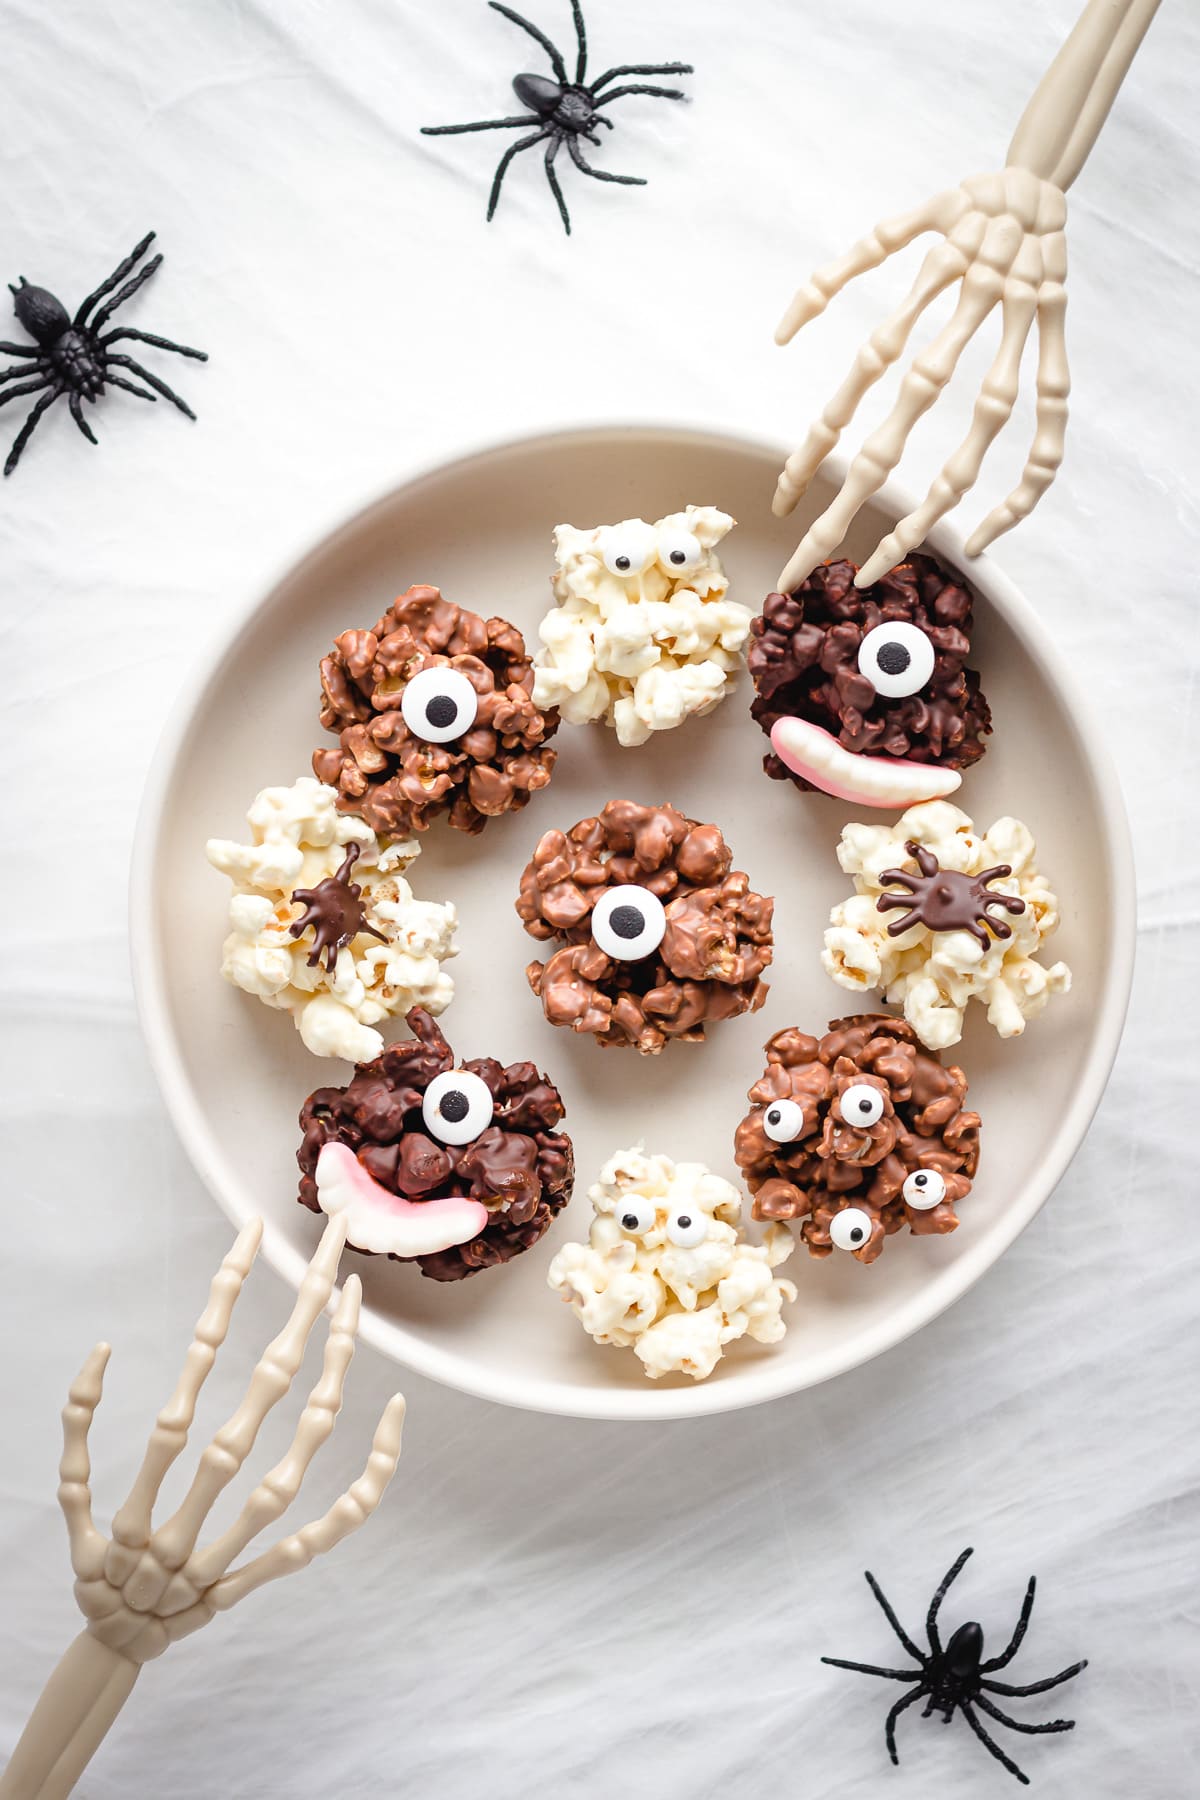 Bowl of Halloween chocolate popcorn balls with skeleton hands reaching in and fake spiders around the bowl.